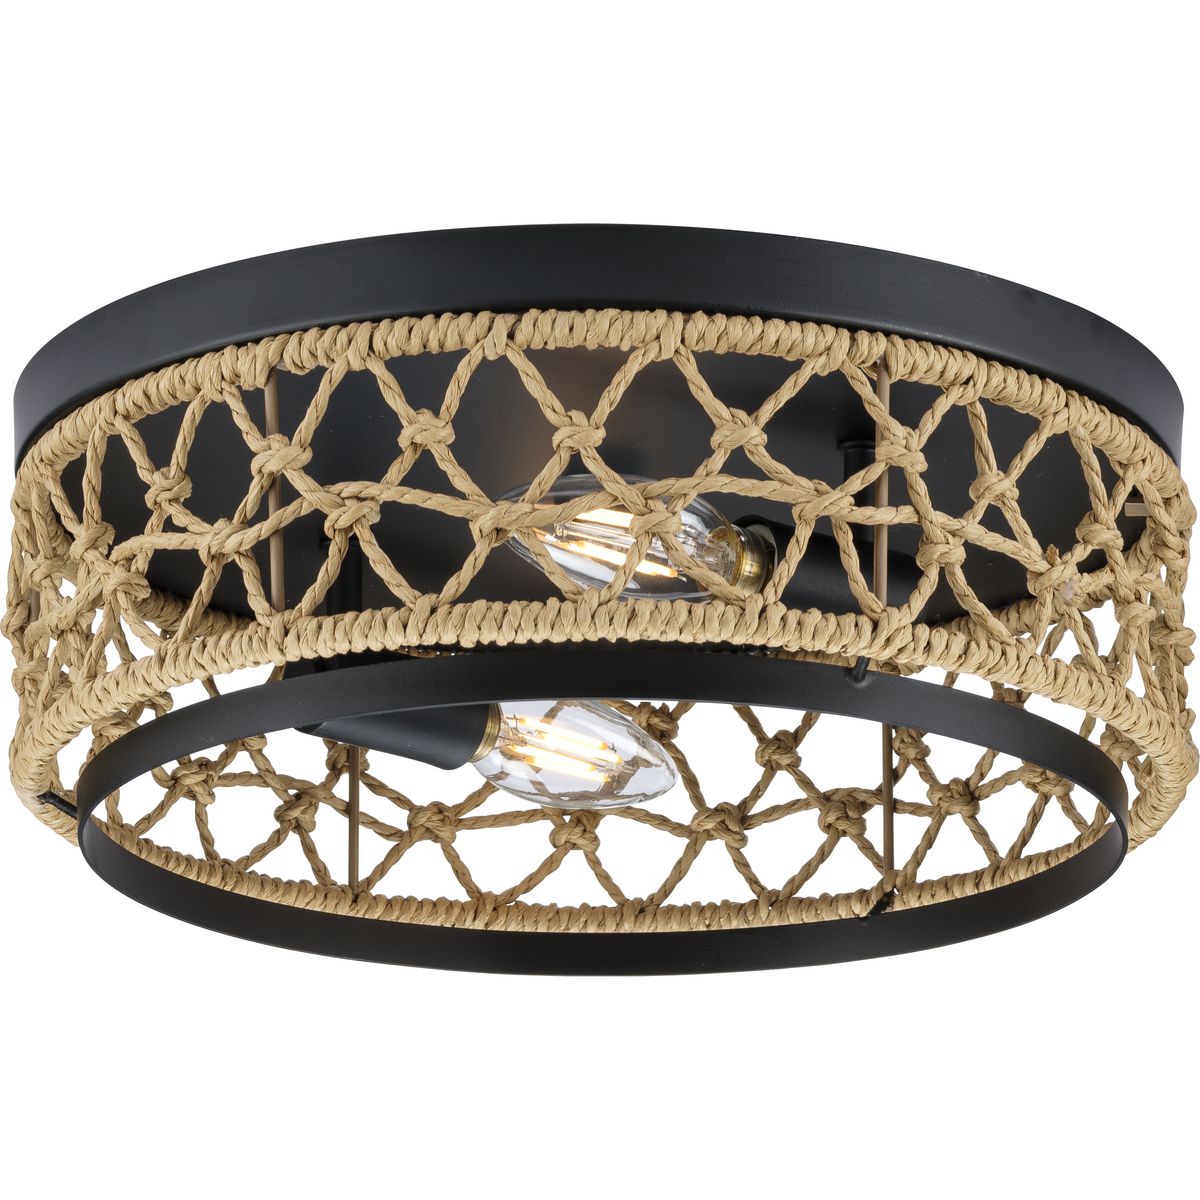 PROGRESS LIGHTING P350242-31M Matte Black Chandra Collection 12 in. Two-Light Matte Black Global Flush Mount with Woven Shade